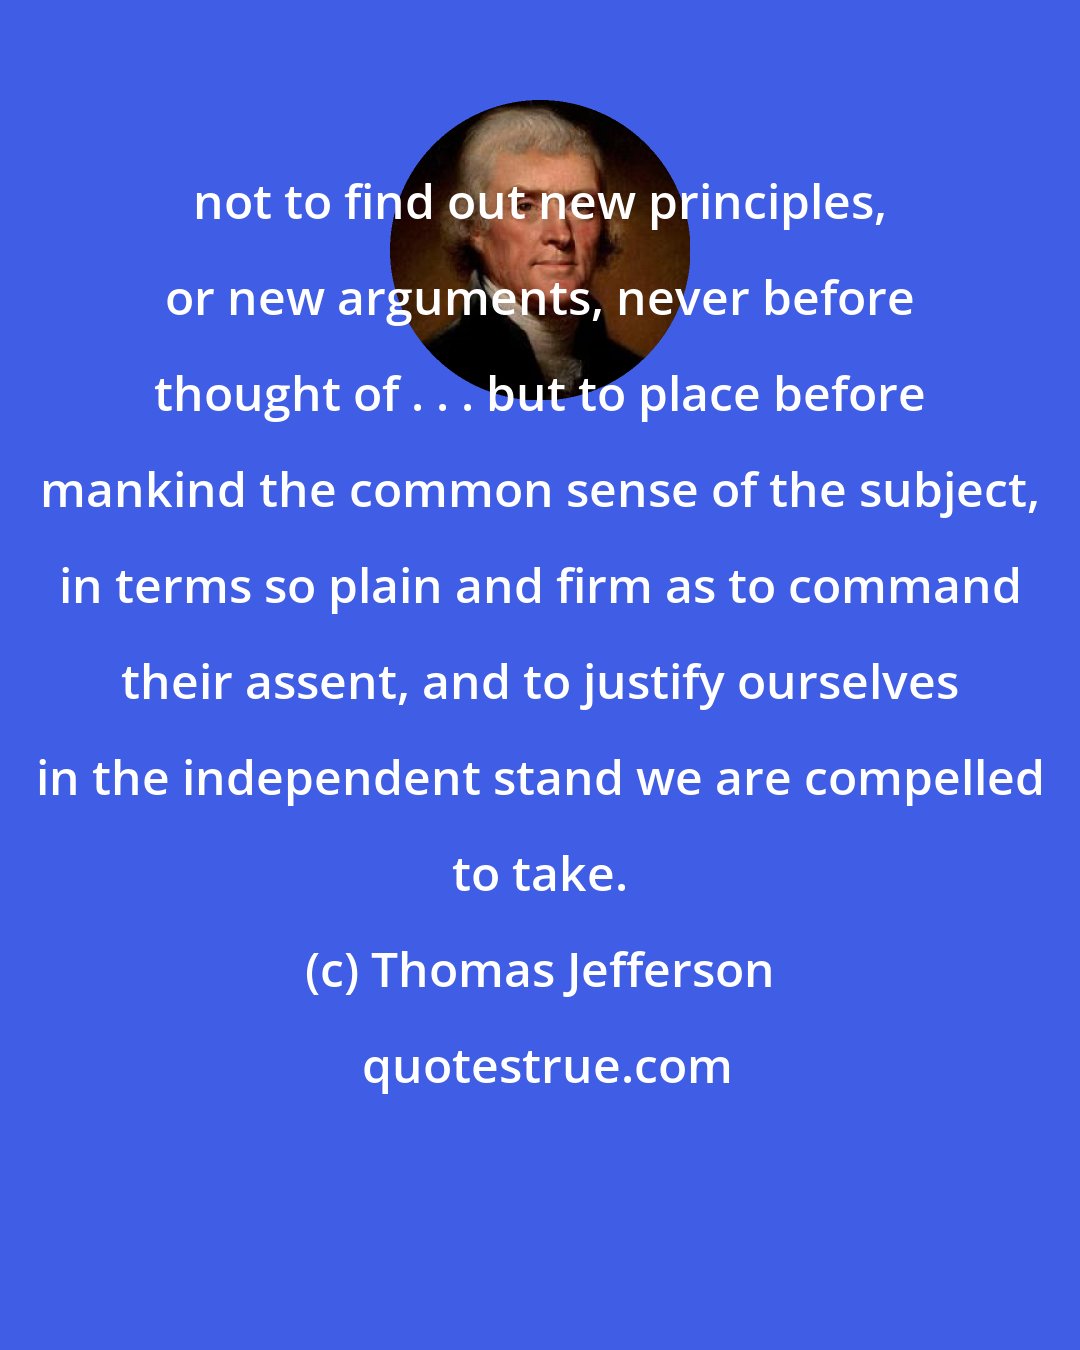 Thomas Jefferson: not to find out new principles, or new arguments, never before thought of . . . but to place before mankind the common sense of the subject, in terms so plain and firm as to command their assent, and to justify ourselves in the independent stand we are compelled to take.